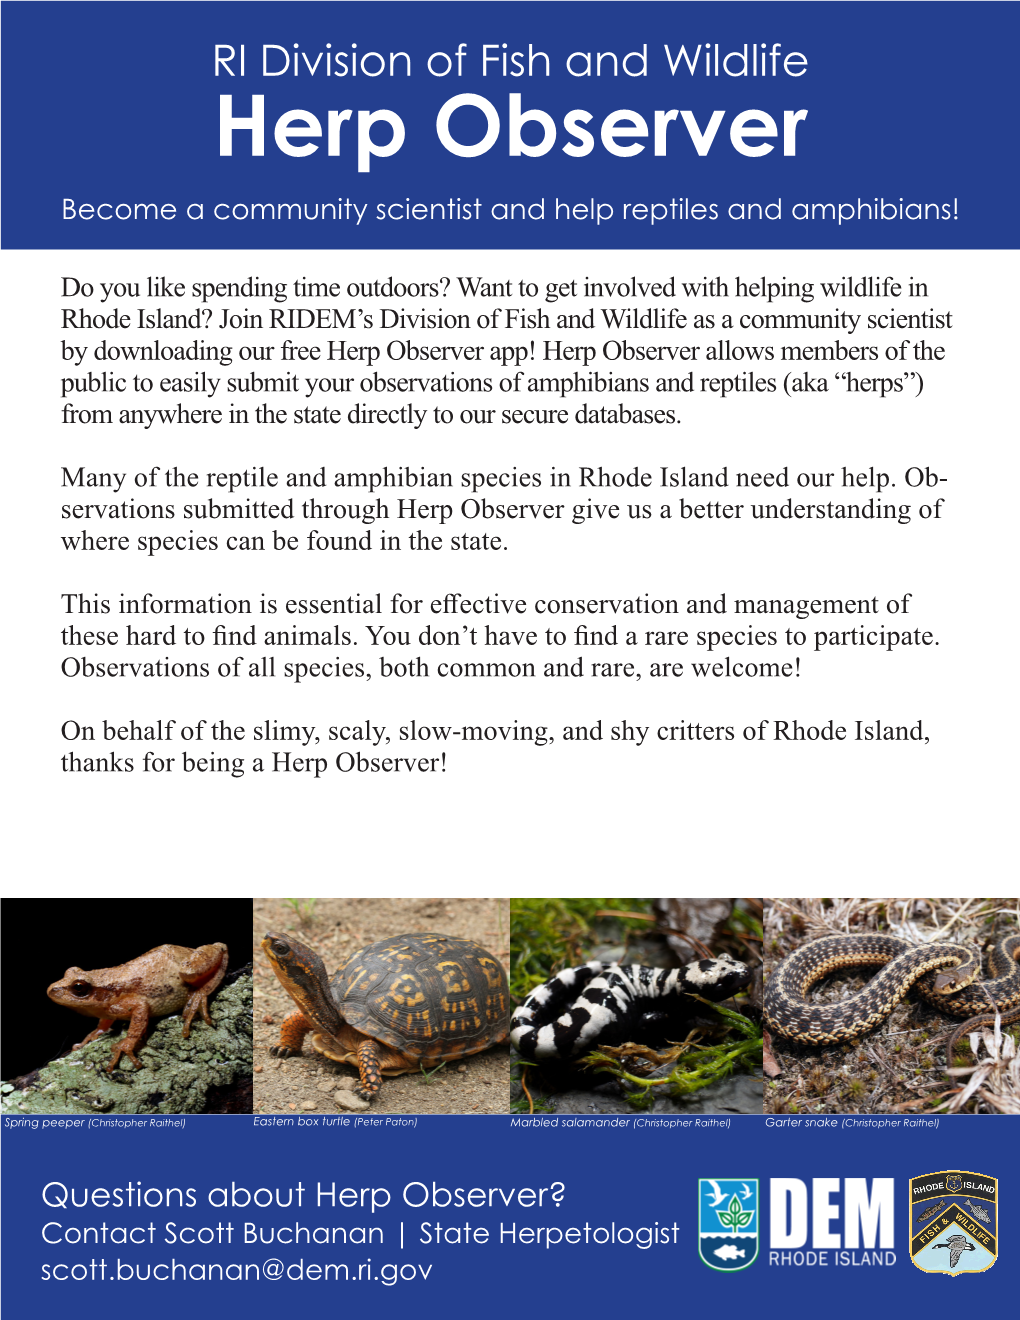 Herp Observer Become a Community Scientist and Help Reptiles and Amphibians!